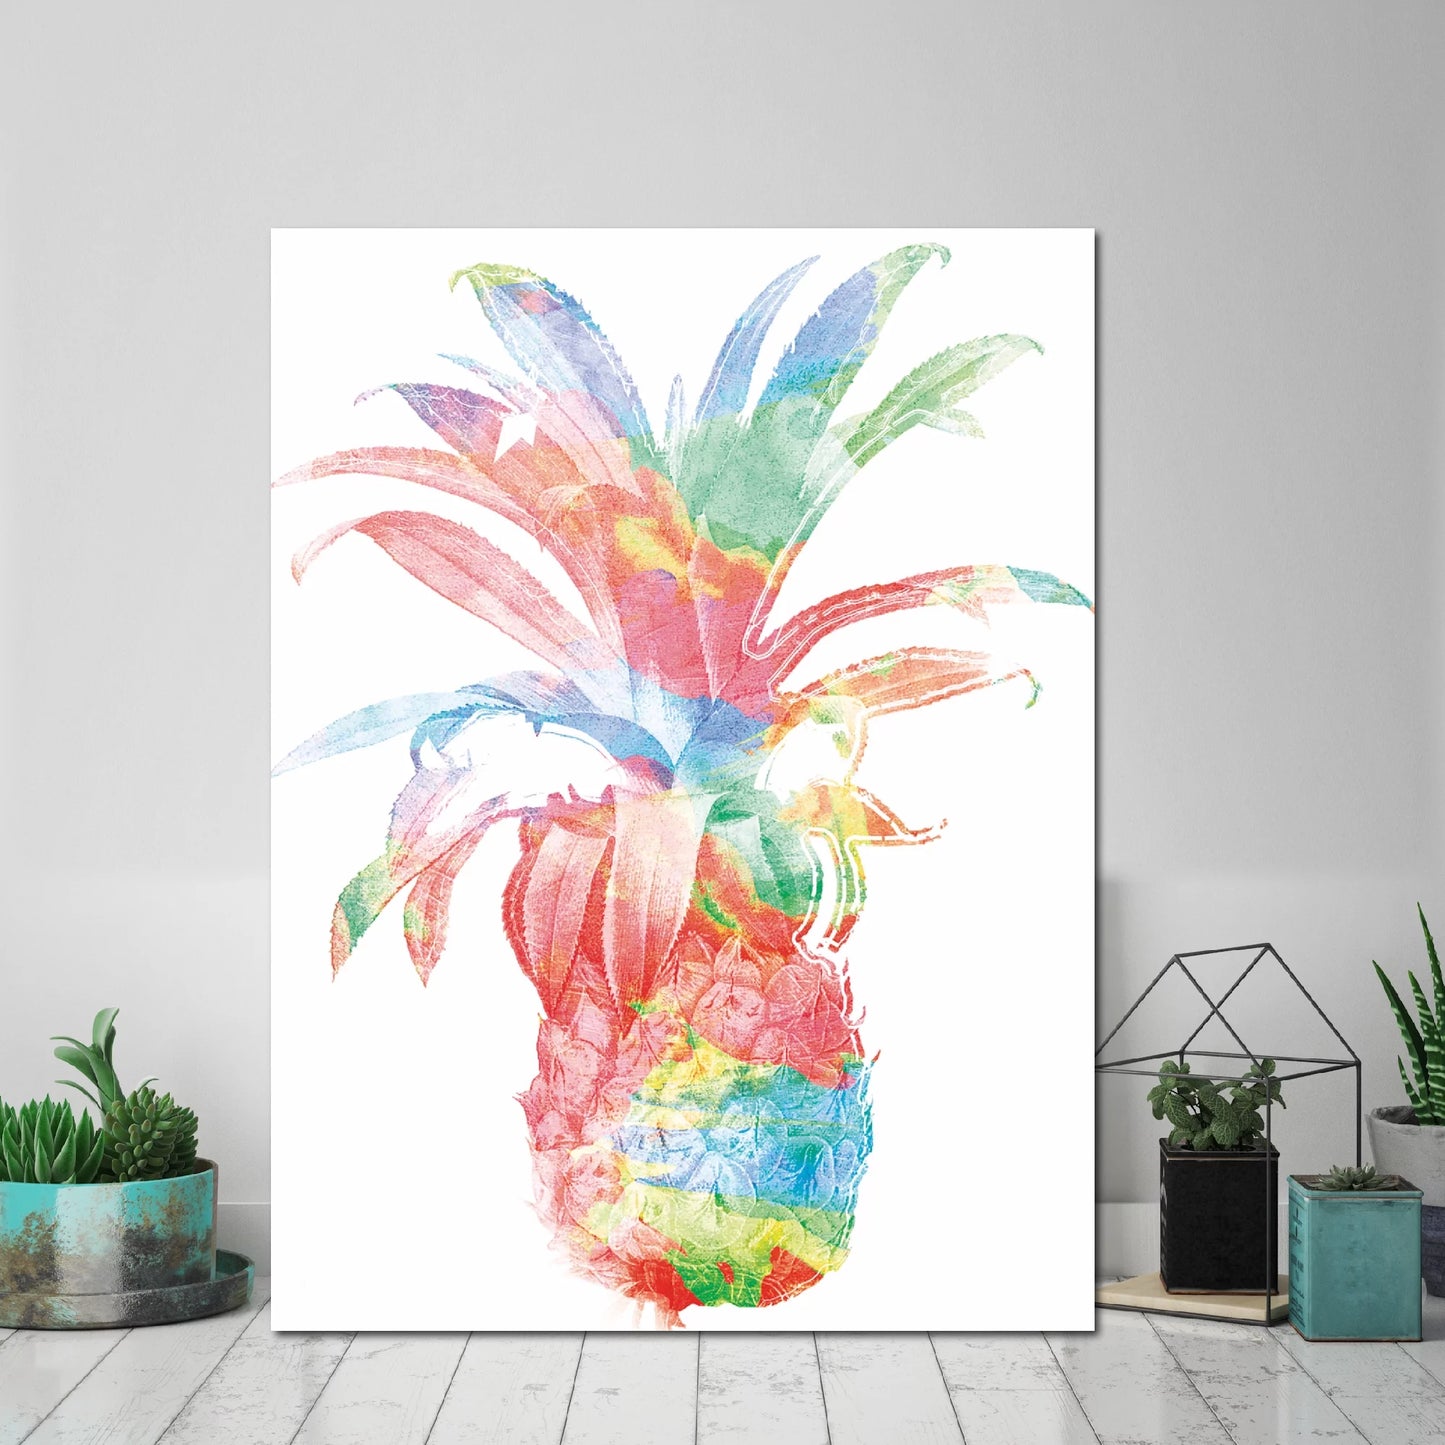 Rainbow Pineapple Gallery-Wrapped Canvas Wall Art, 16X20